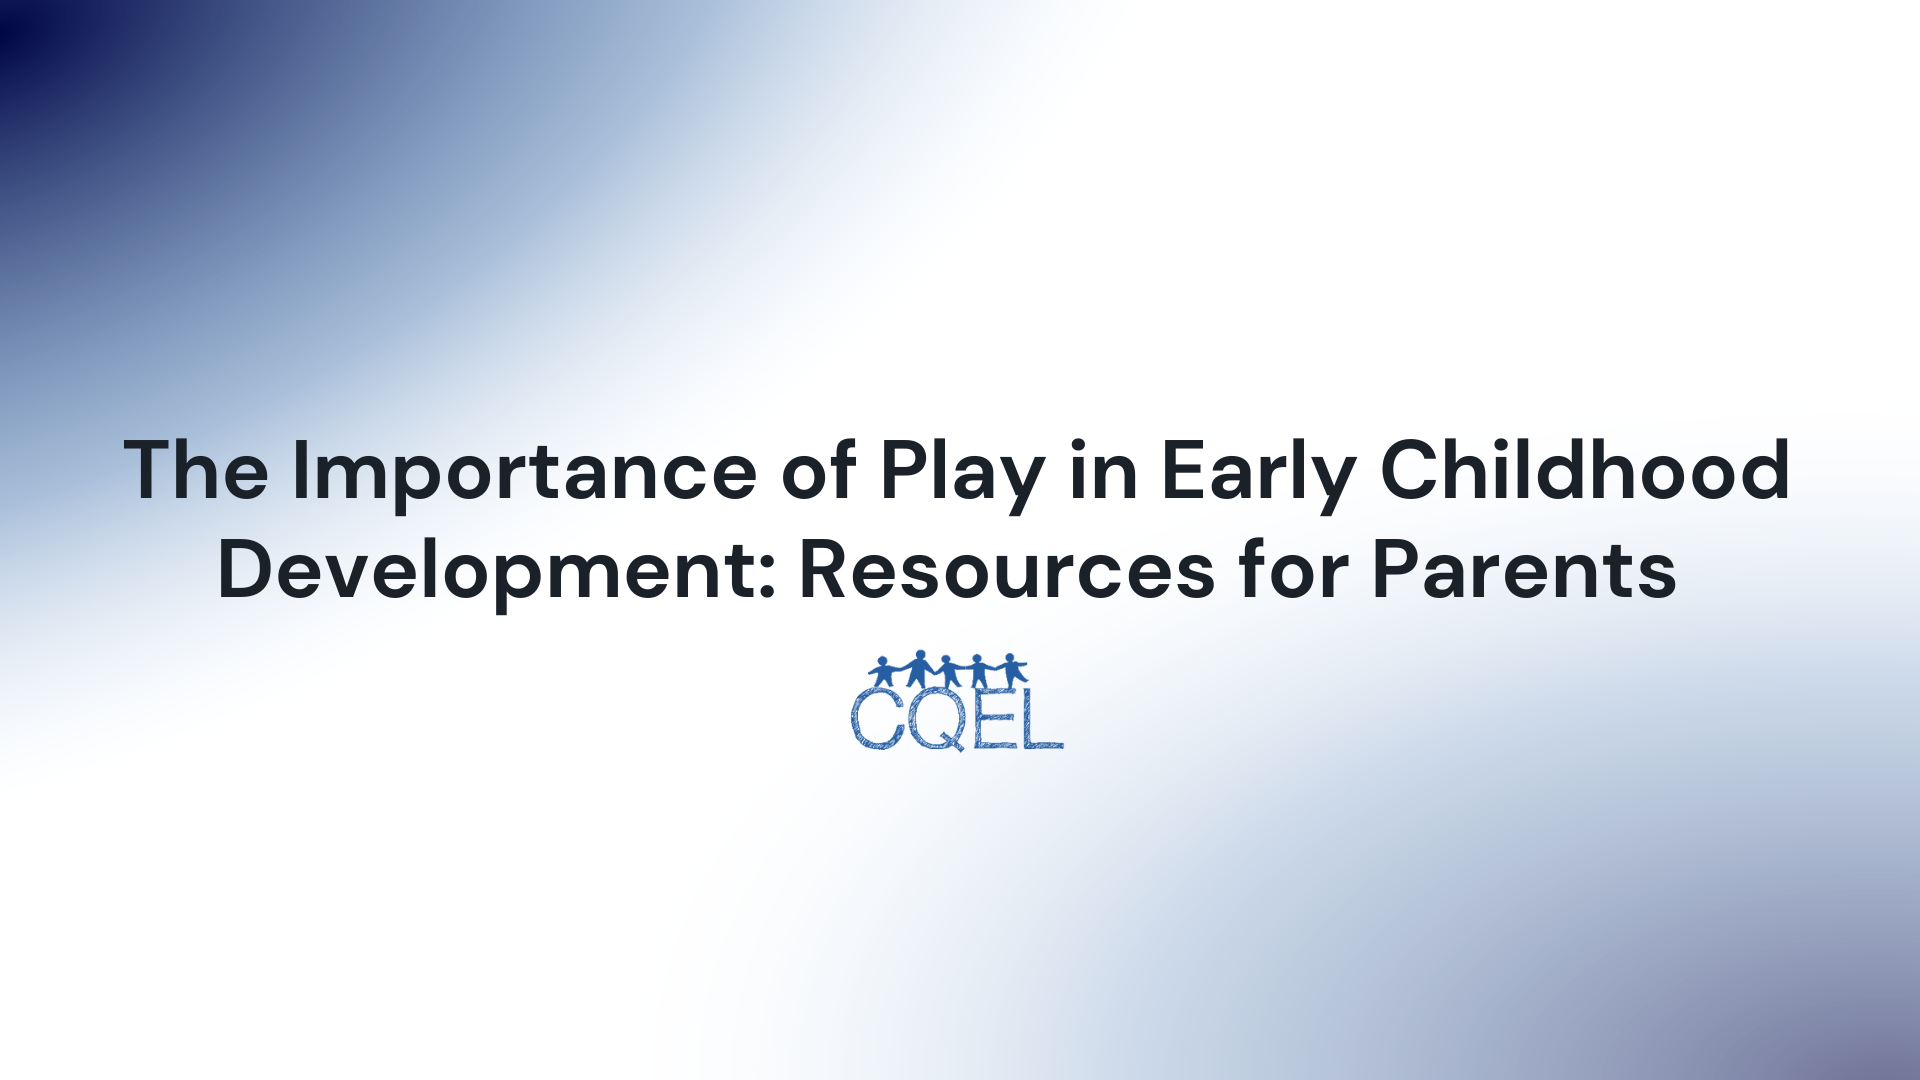 The Importance of Play in Early Childhood Development: Resources for Parents